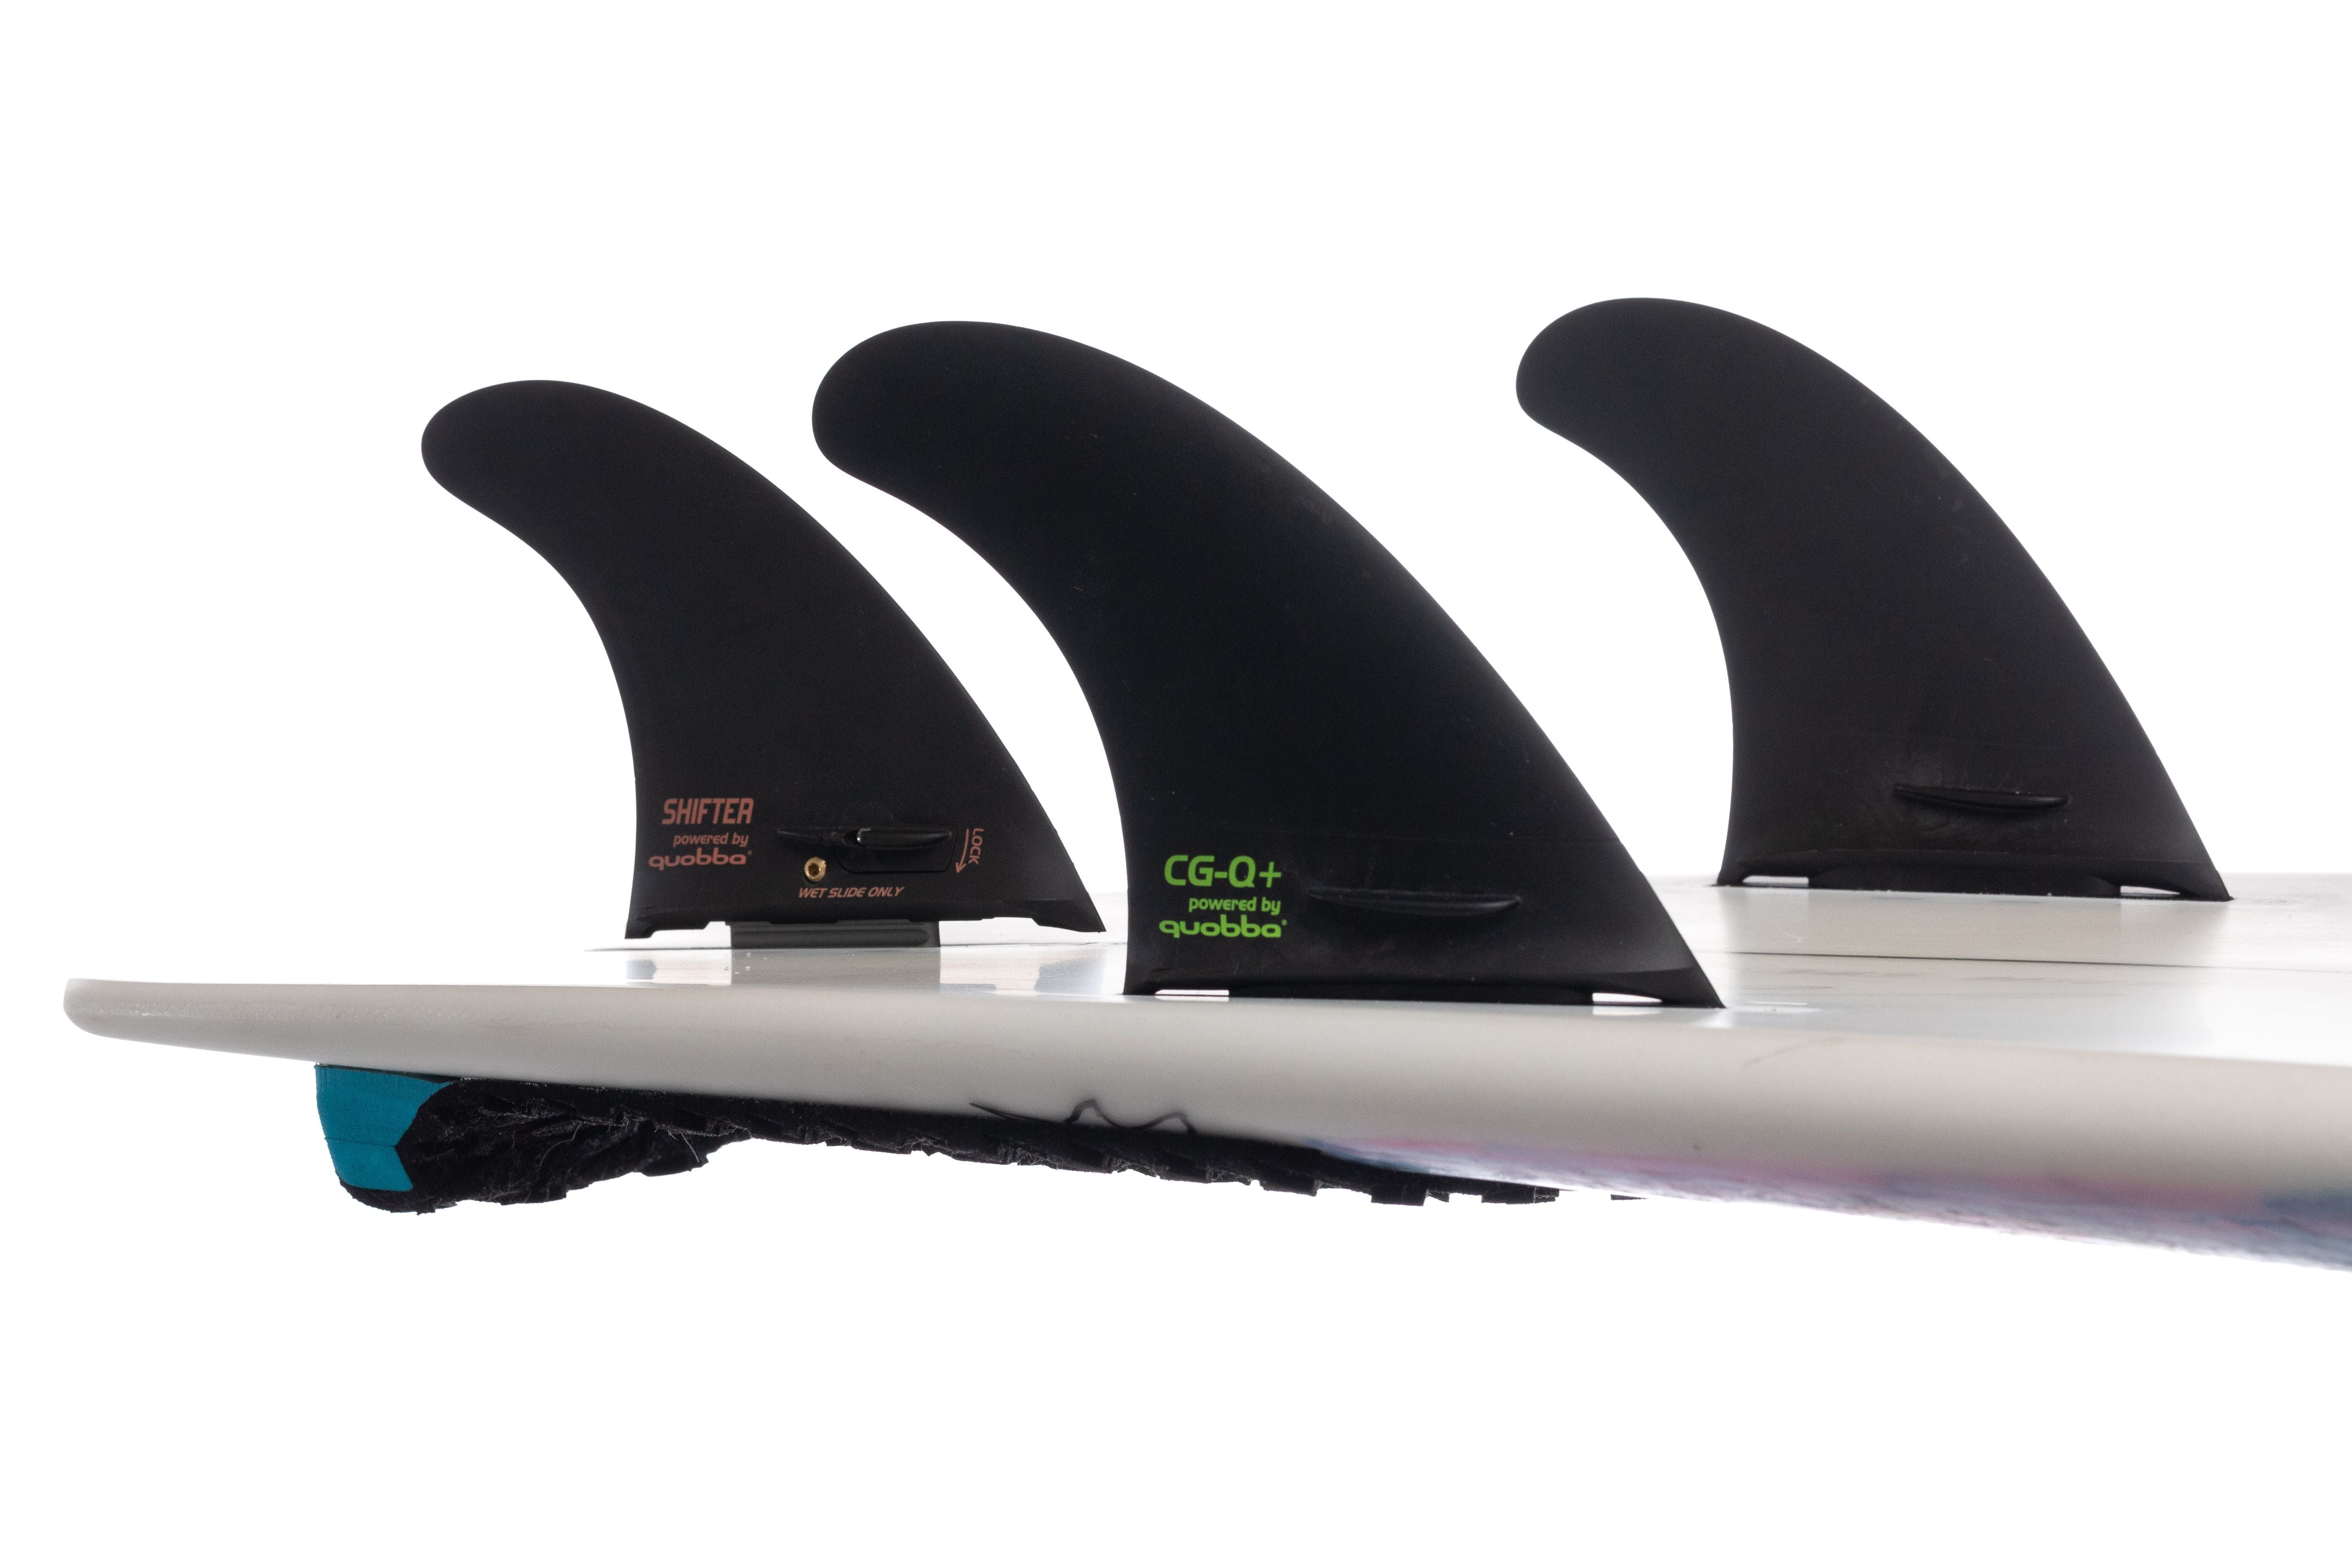 Buy Now - Shifter Fin Dual Tab + Thruster Set (4 x fins) Package